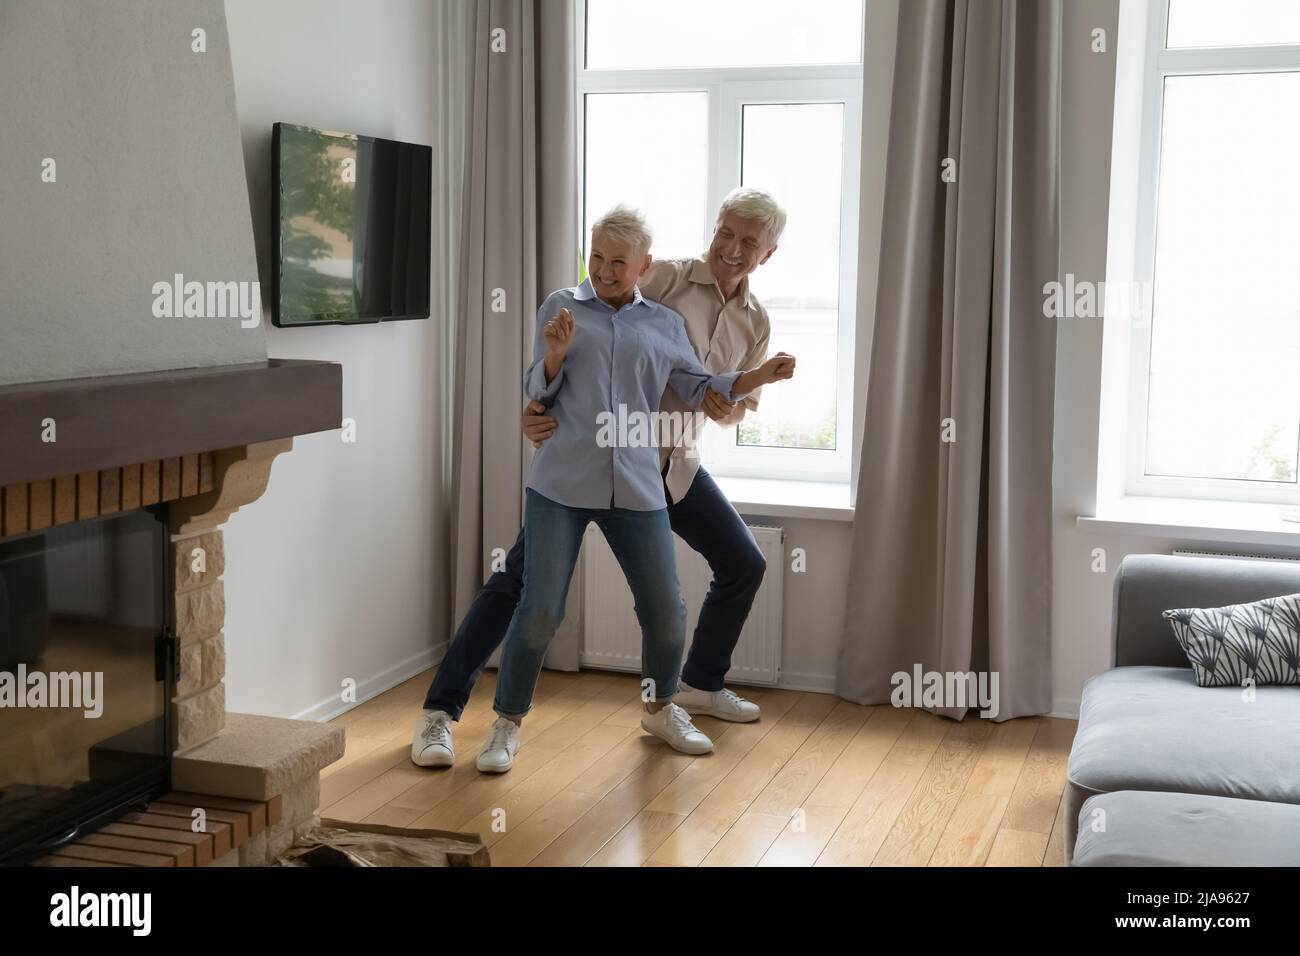 Happy energetic older age couple dancing at modern living room Stock Photo